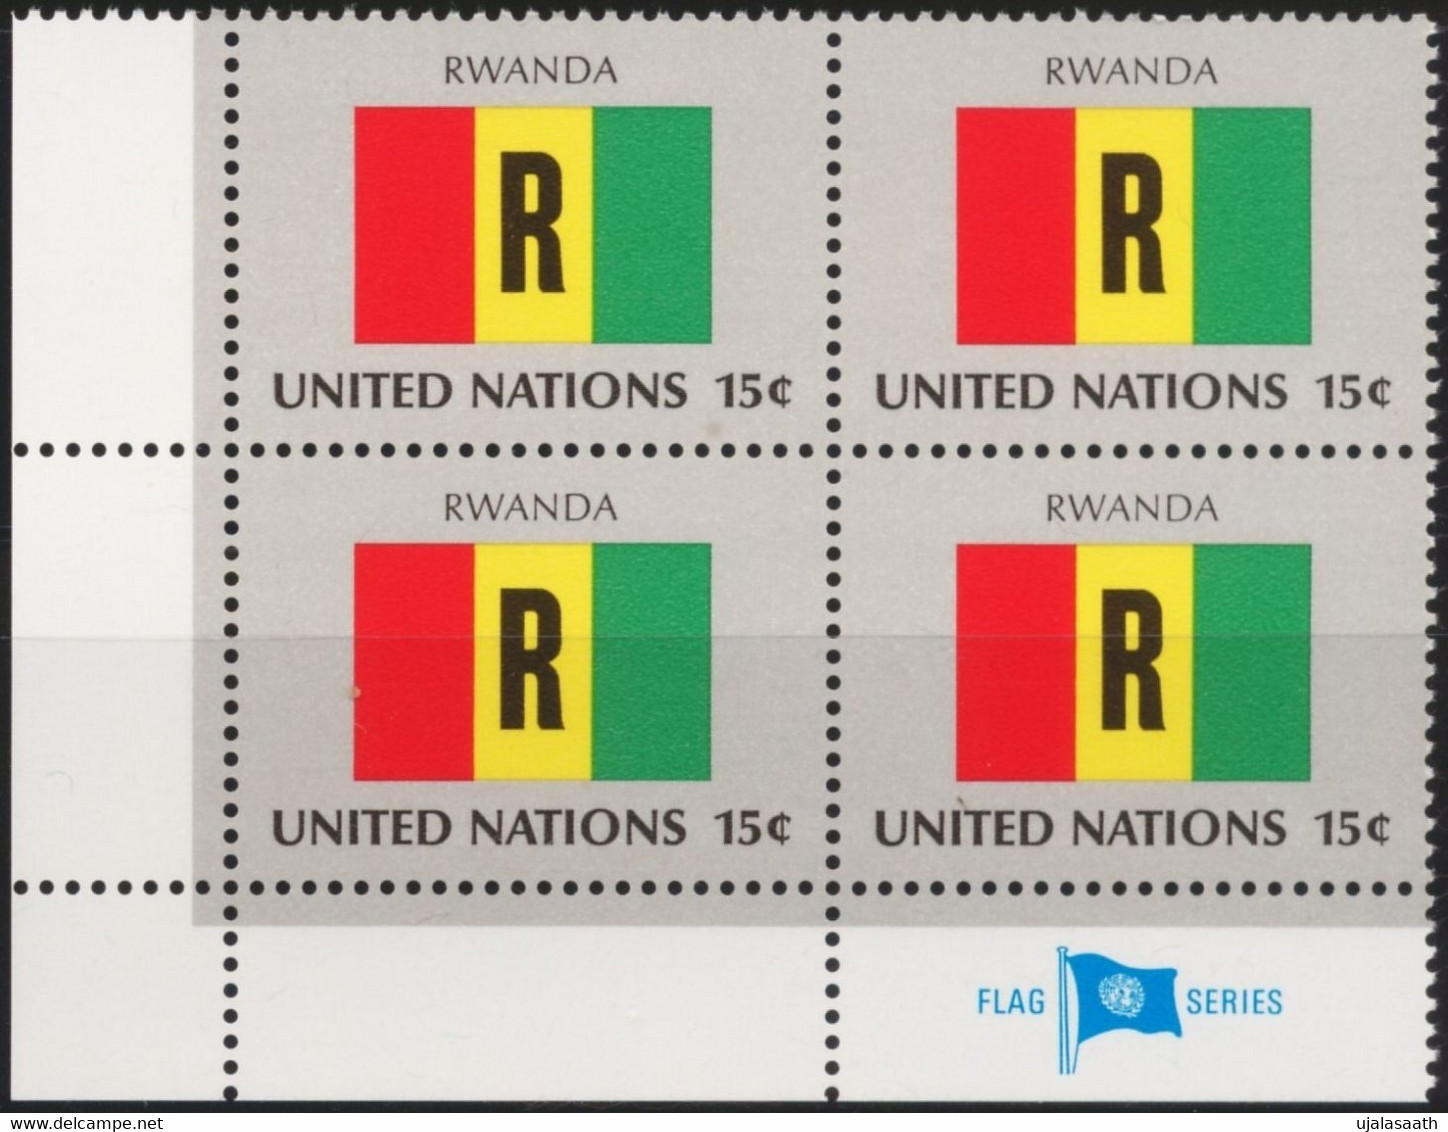 1980-United Nations Member Countries-First Flag Series, Flag Of RWANDA, Block Of 4, Mint Stamps. - Unused Stamps